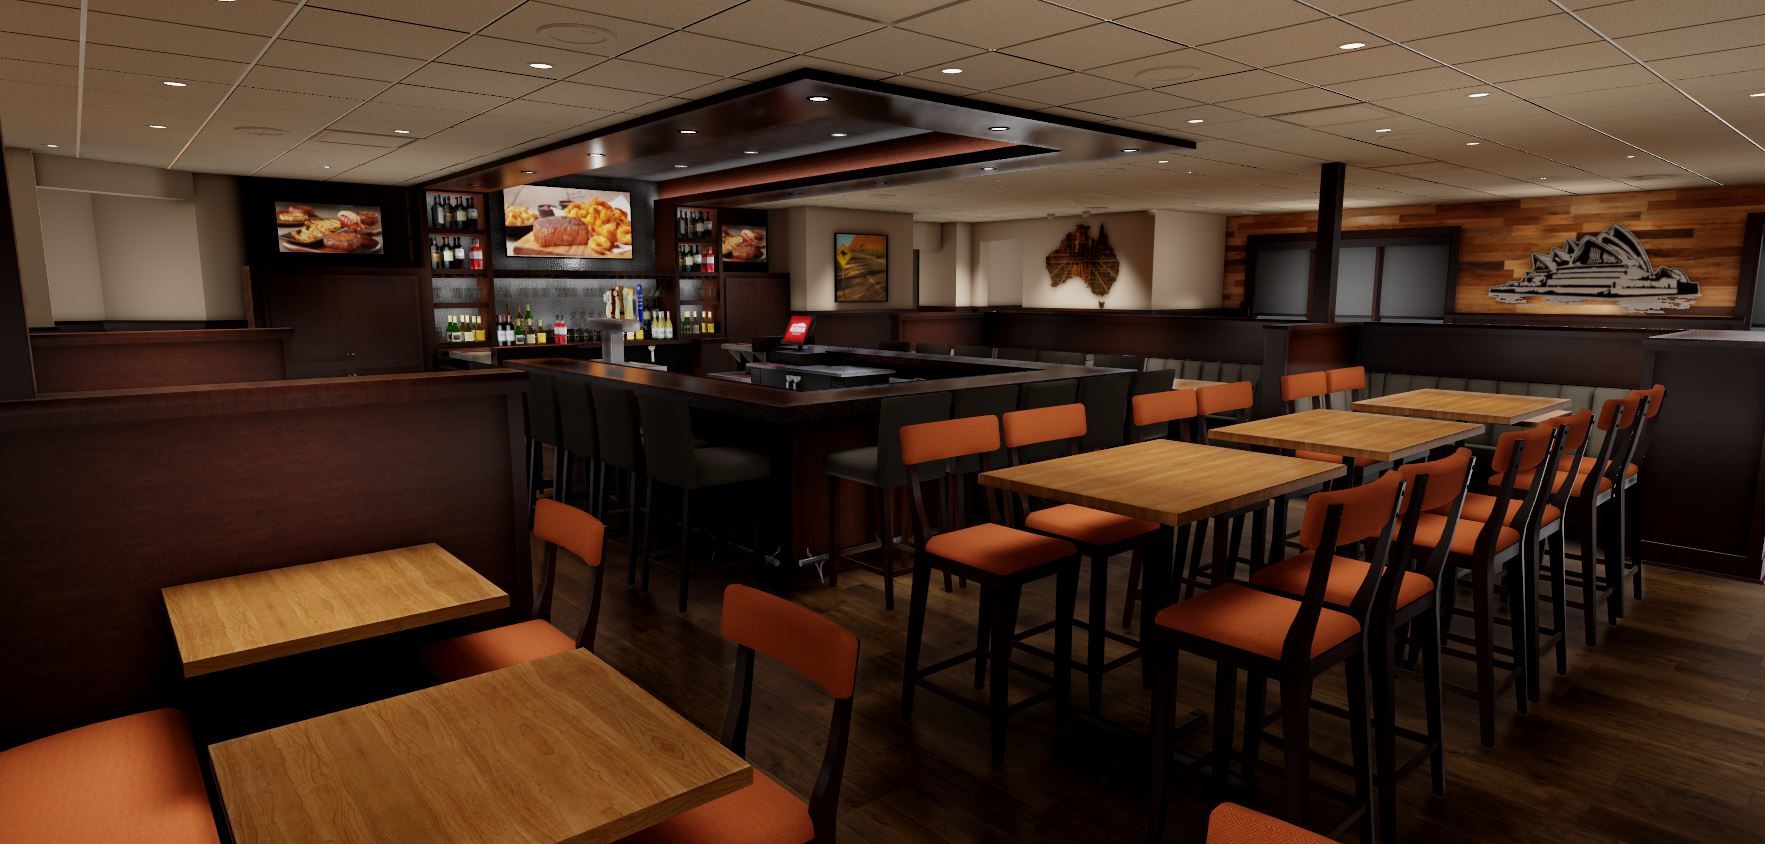 An example of an Outback Steakhouse renovation.  